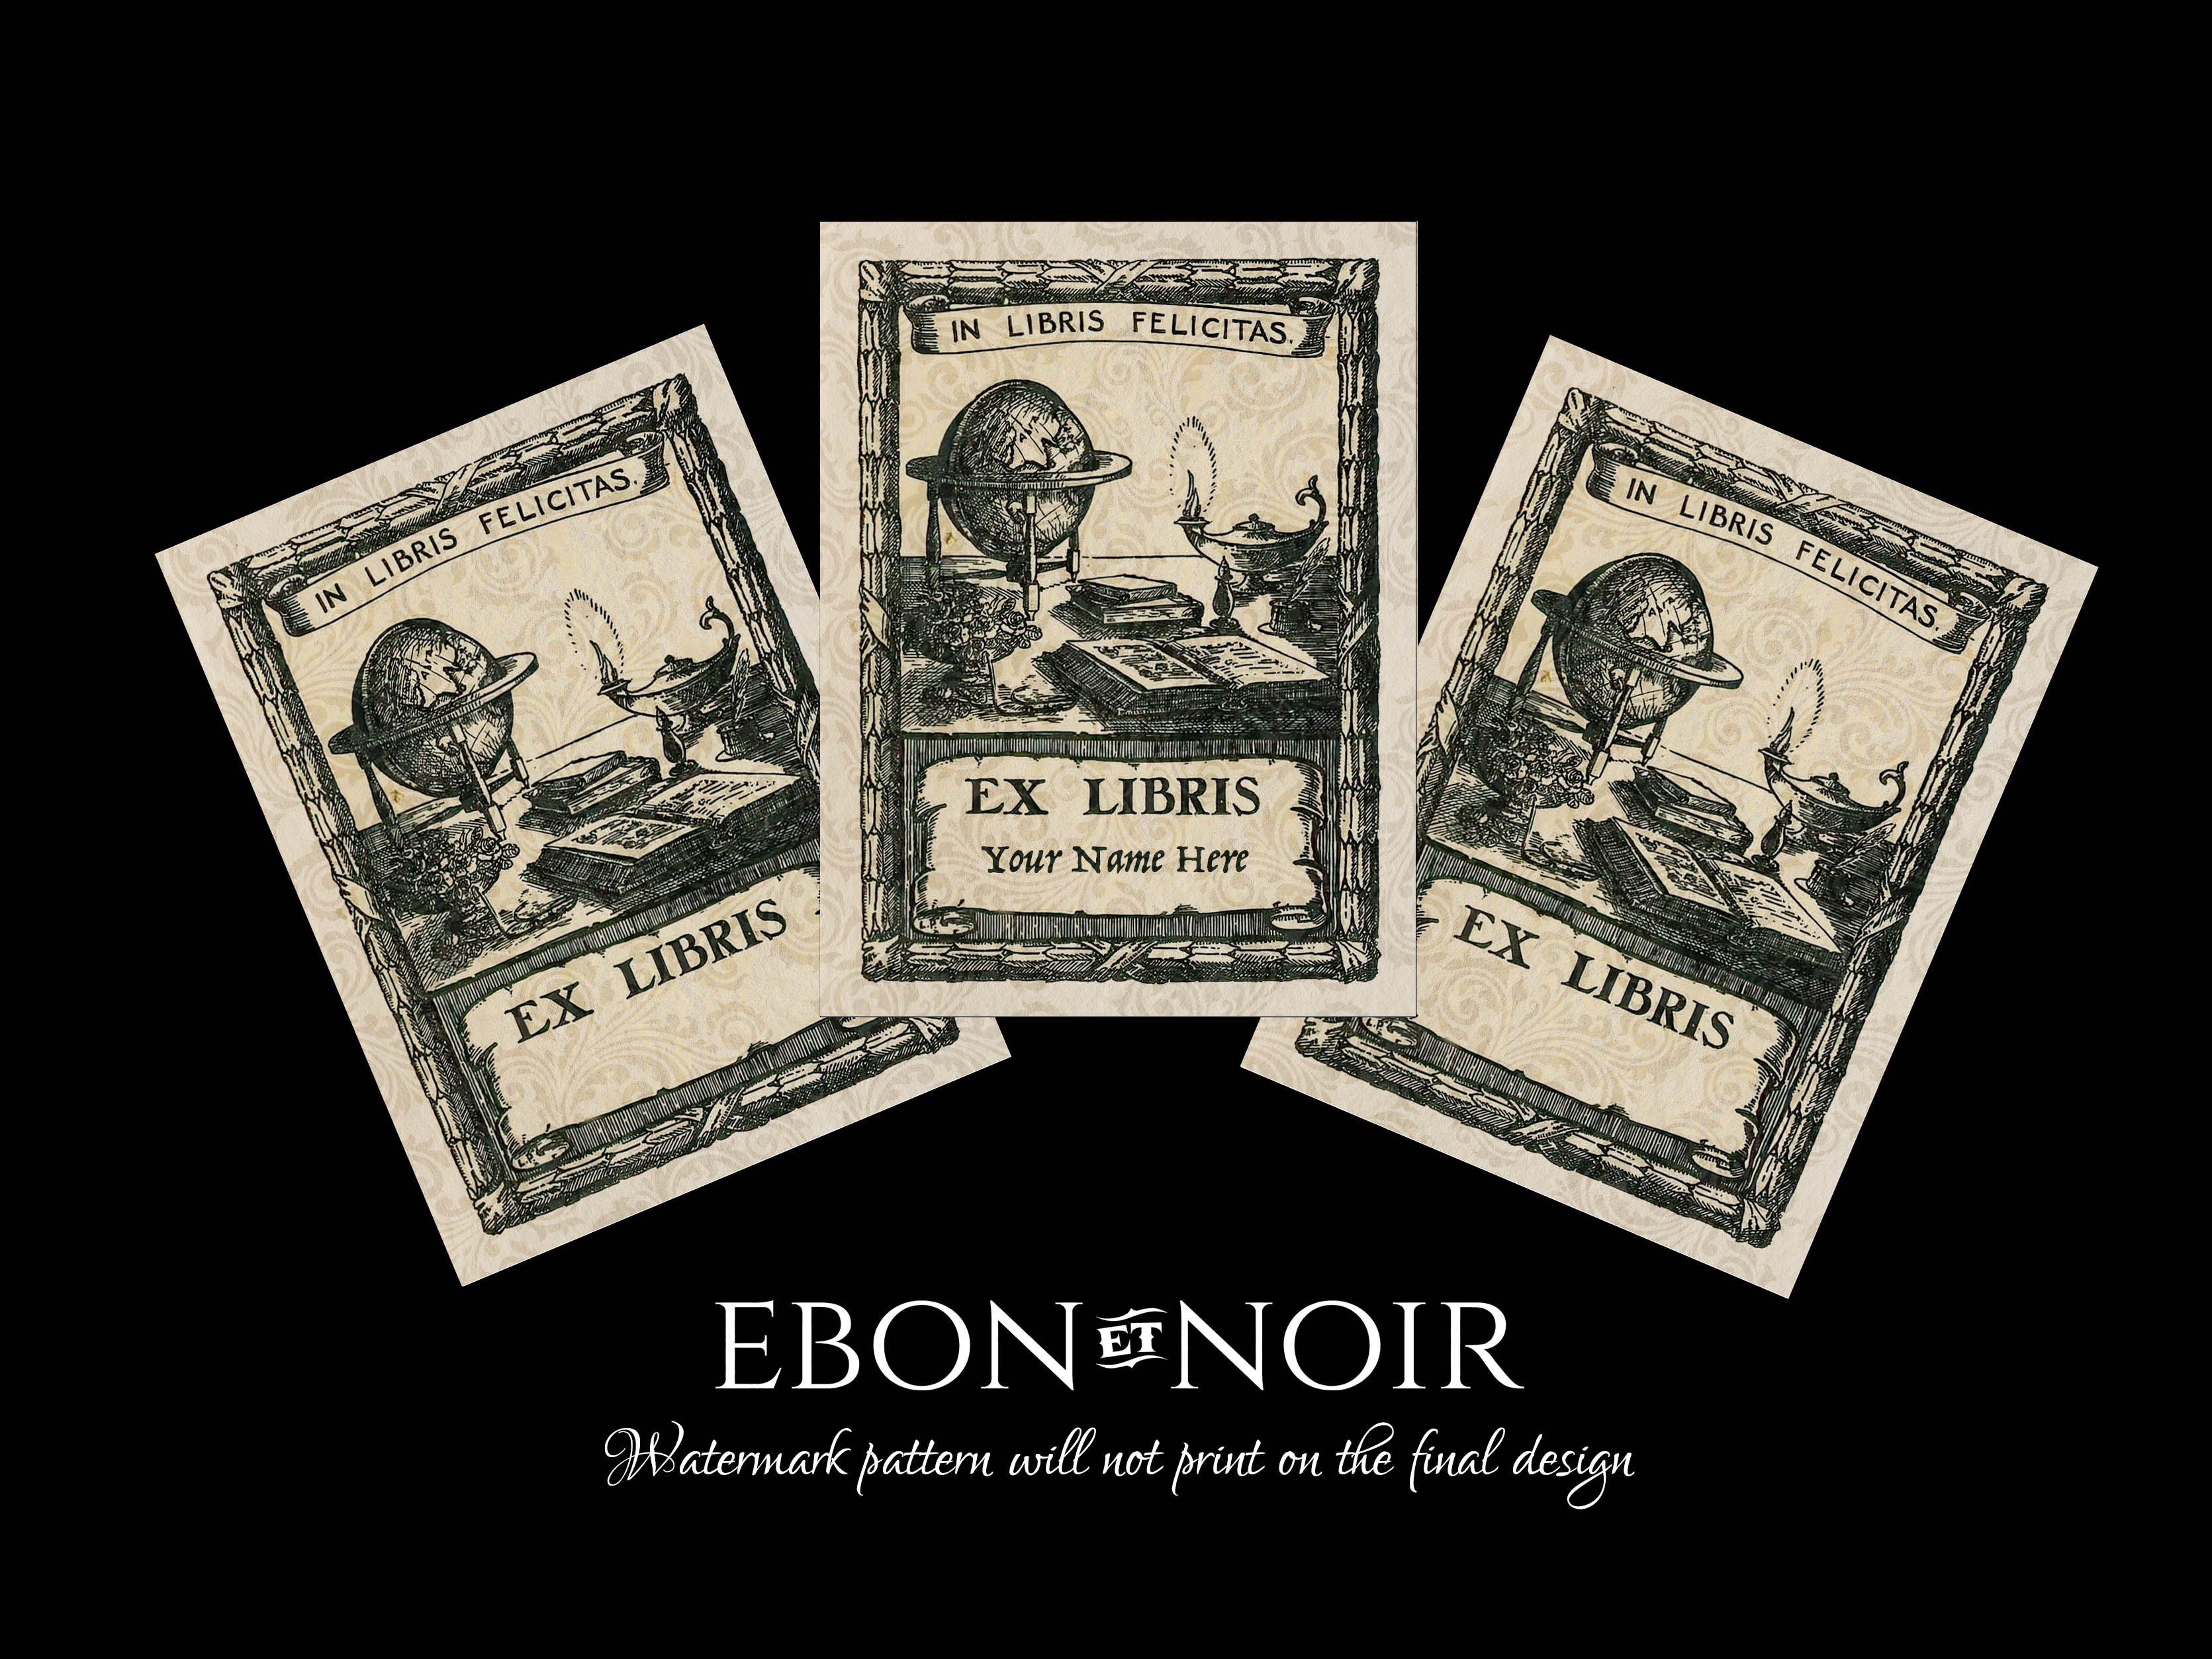 In Libris Felicitas, Personalized Ex-Libris Bookplates, Crafted on Traditional Gummed Paper, 3in x 4in, Set of 30